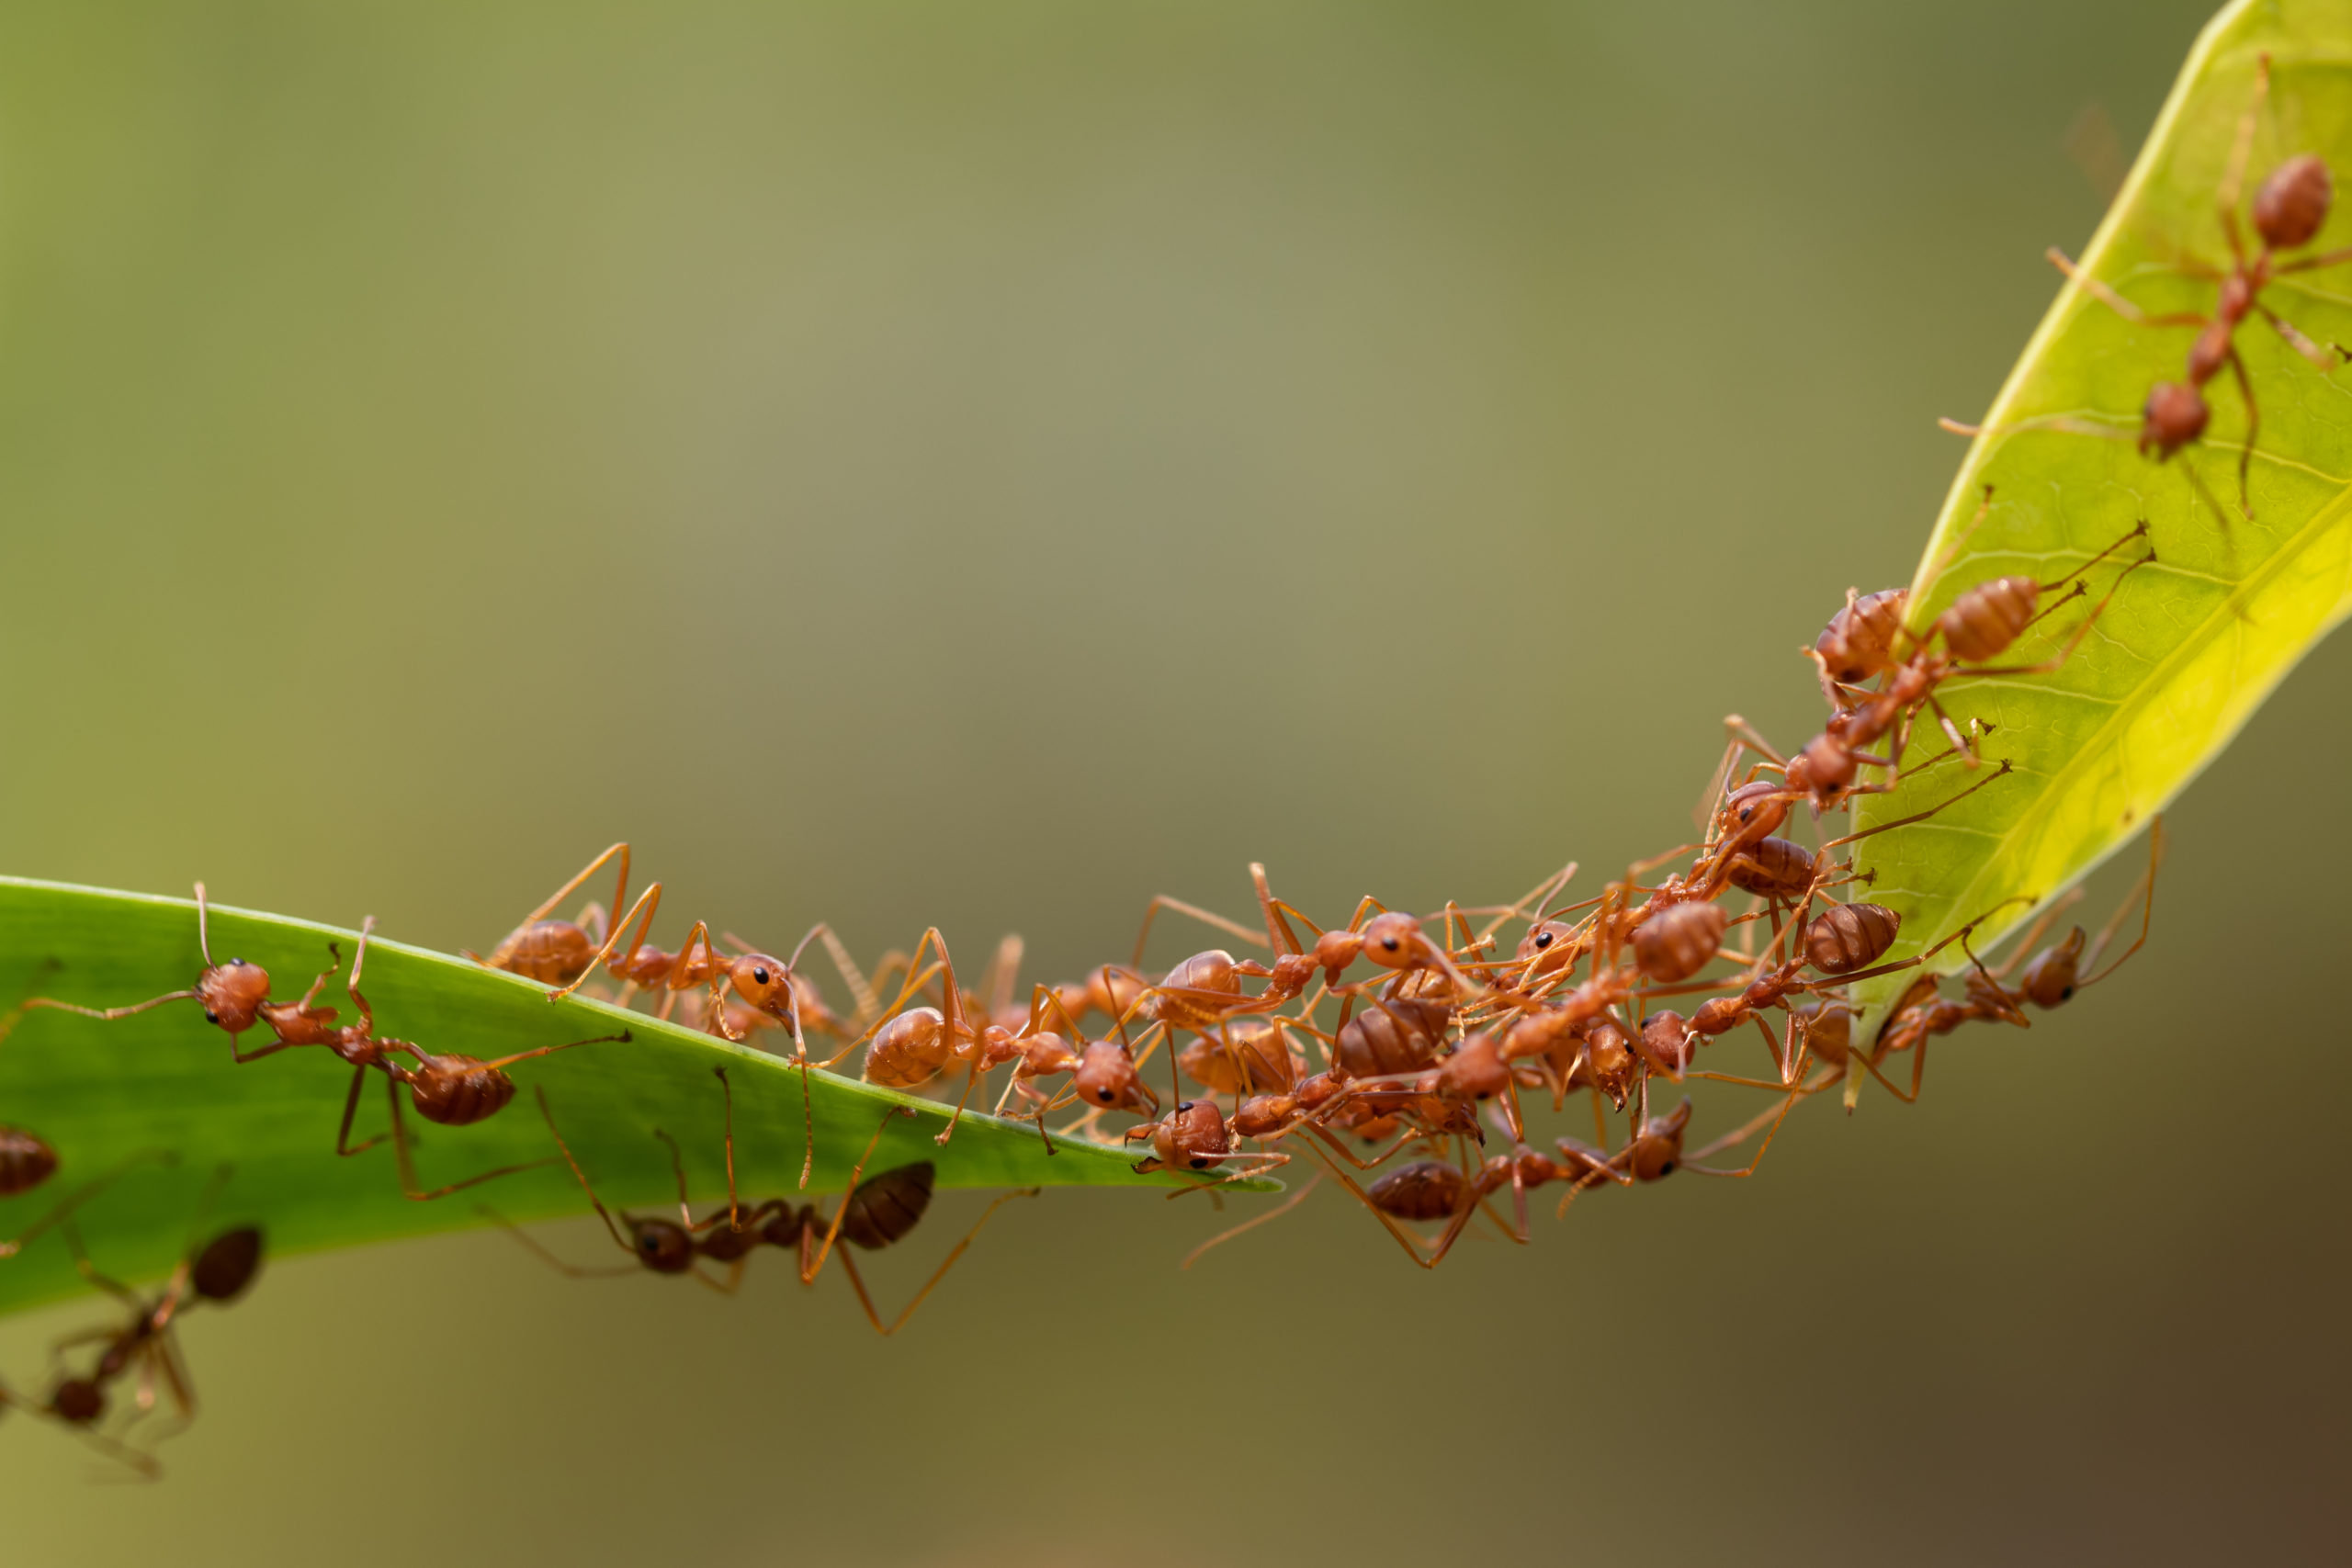 Ant Action Standingant Bridge Unity Teamconcept Team Work Together Stockpack Adobe Stock Scaled 